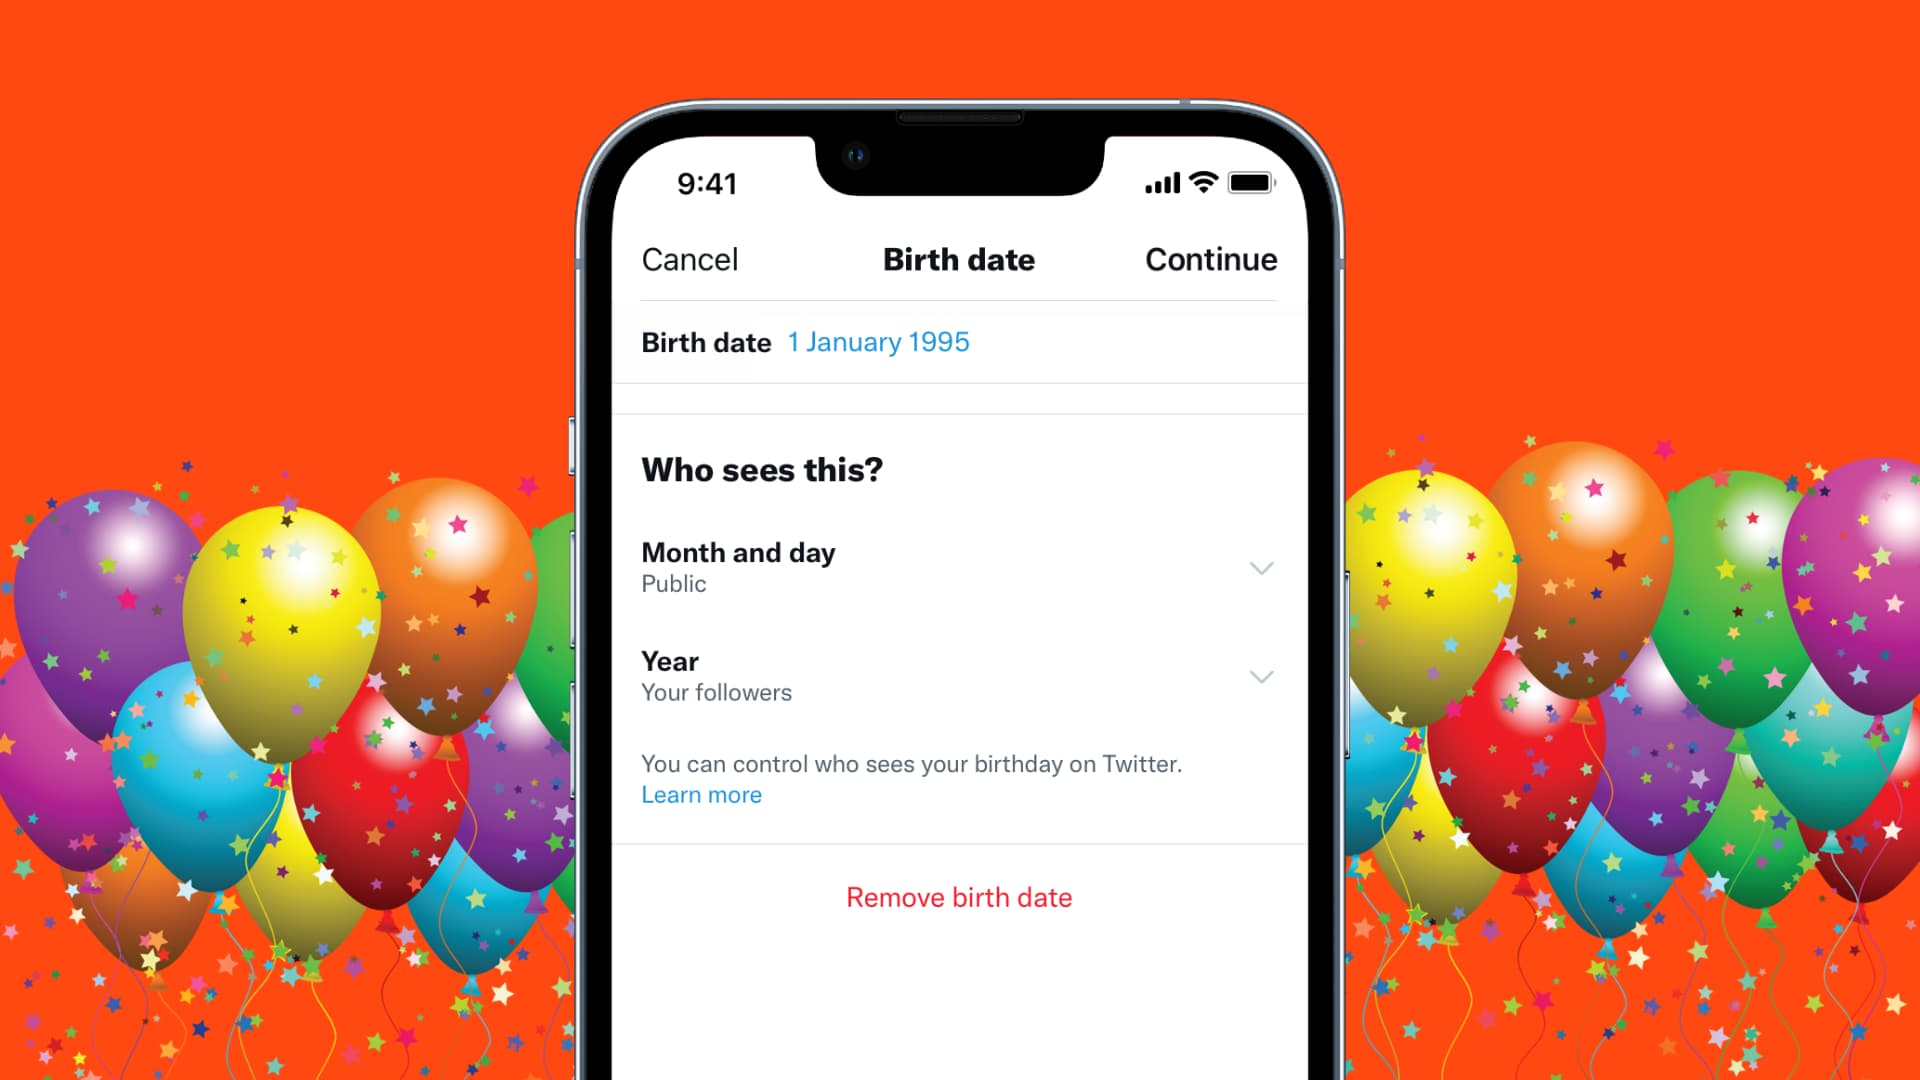 Remove your birthday from Twitter